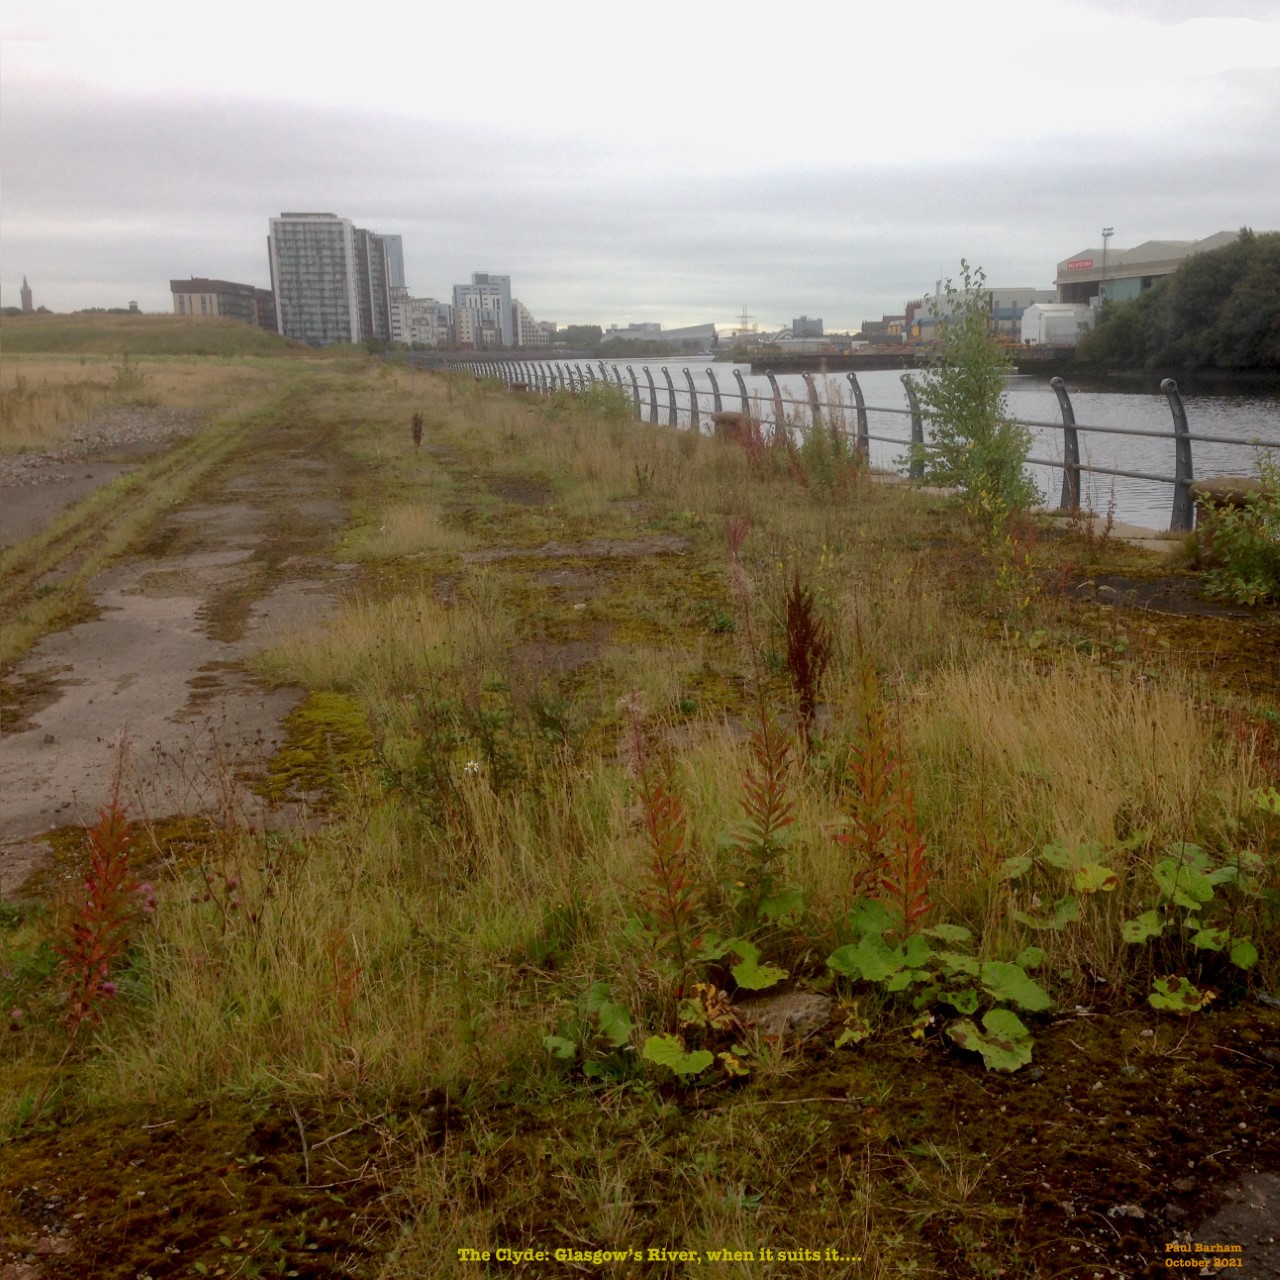 Photo of wasteland next to the River Clyde